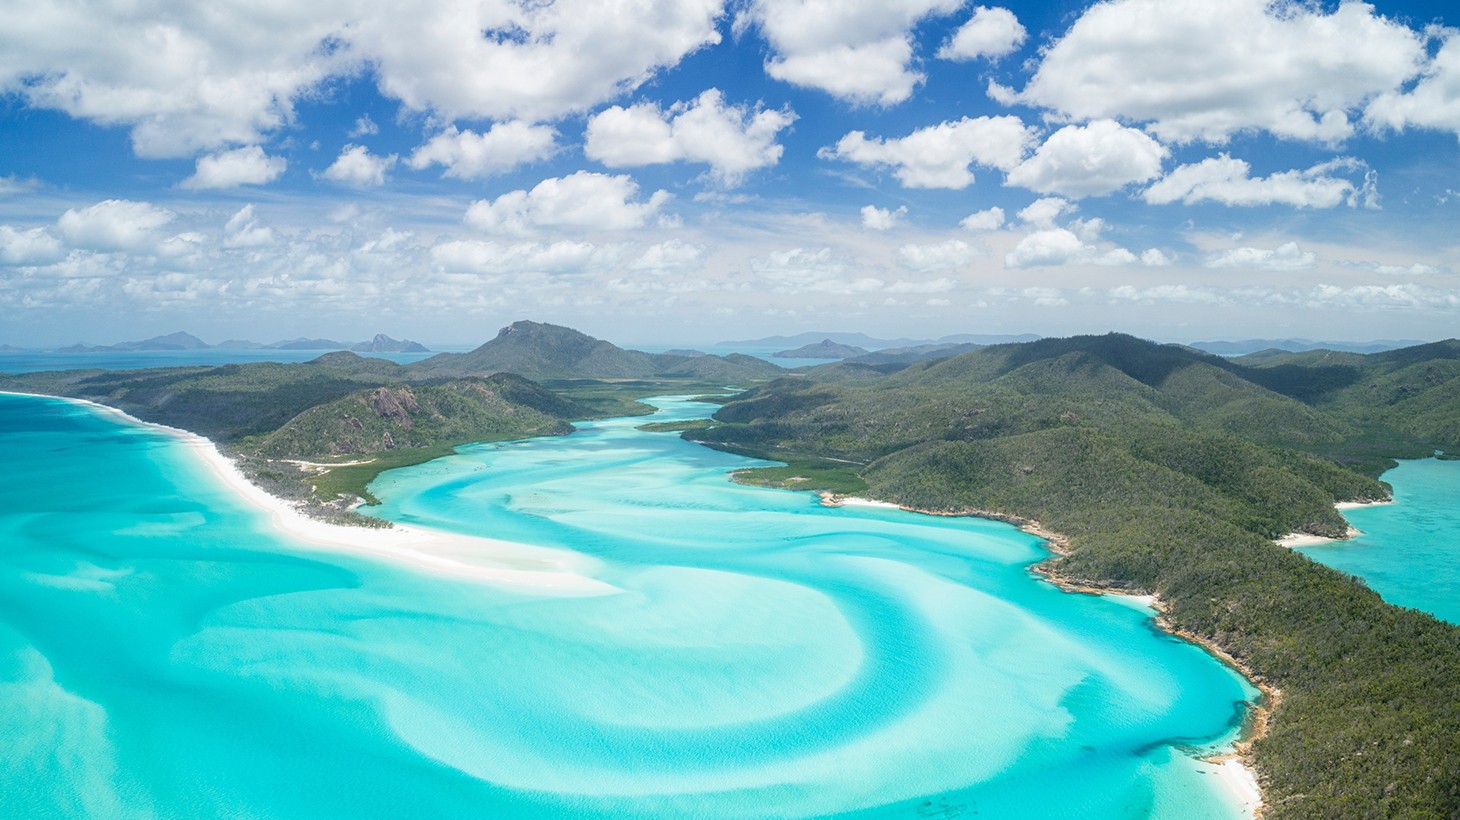 Airlie Beach: 70-Minute Whitsunday Islands & Reef Scenic Flight with ...